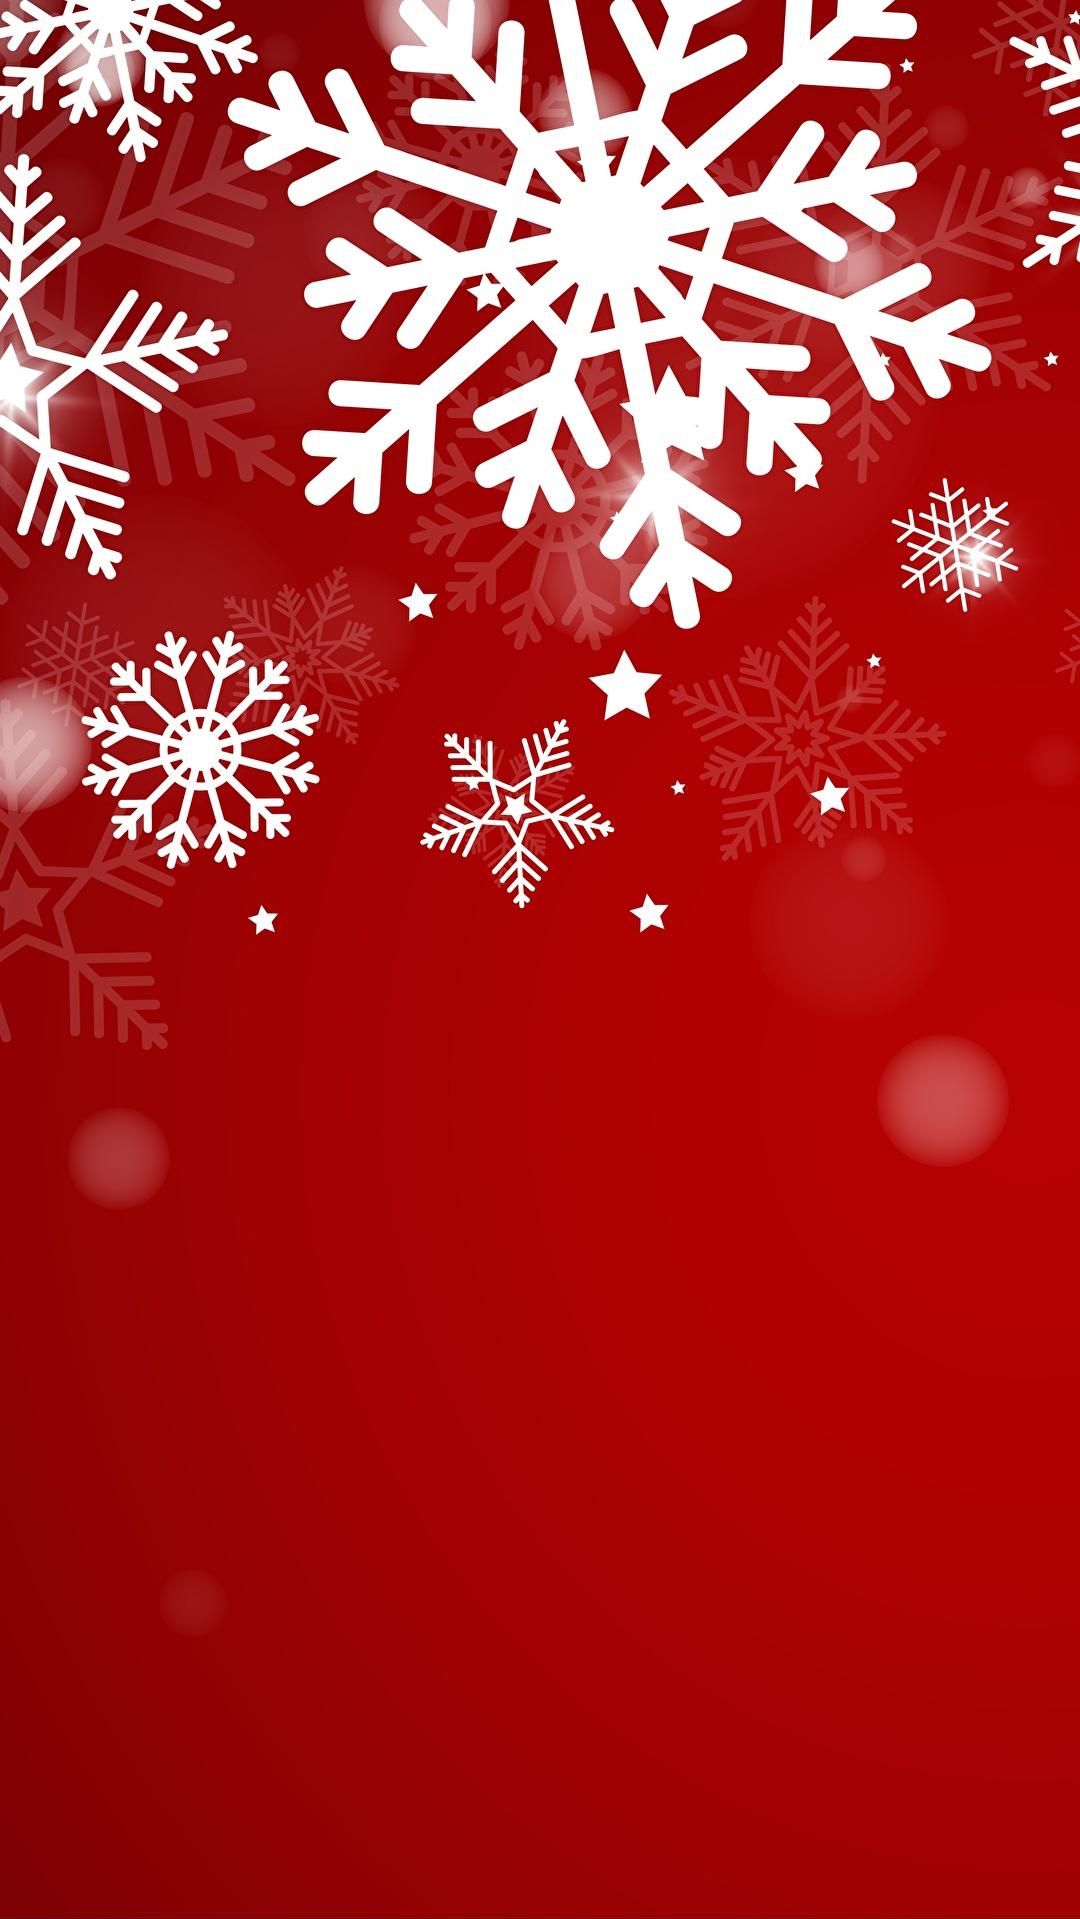 Wallpaper Christmas Snowflakes Template Greeting Card Red